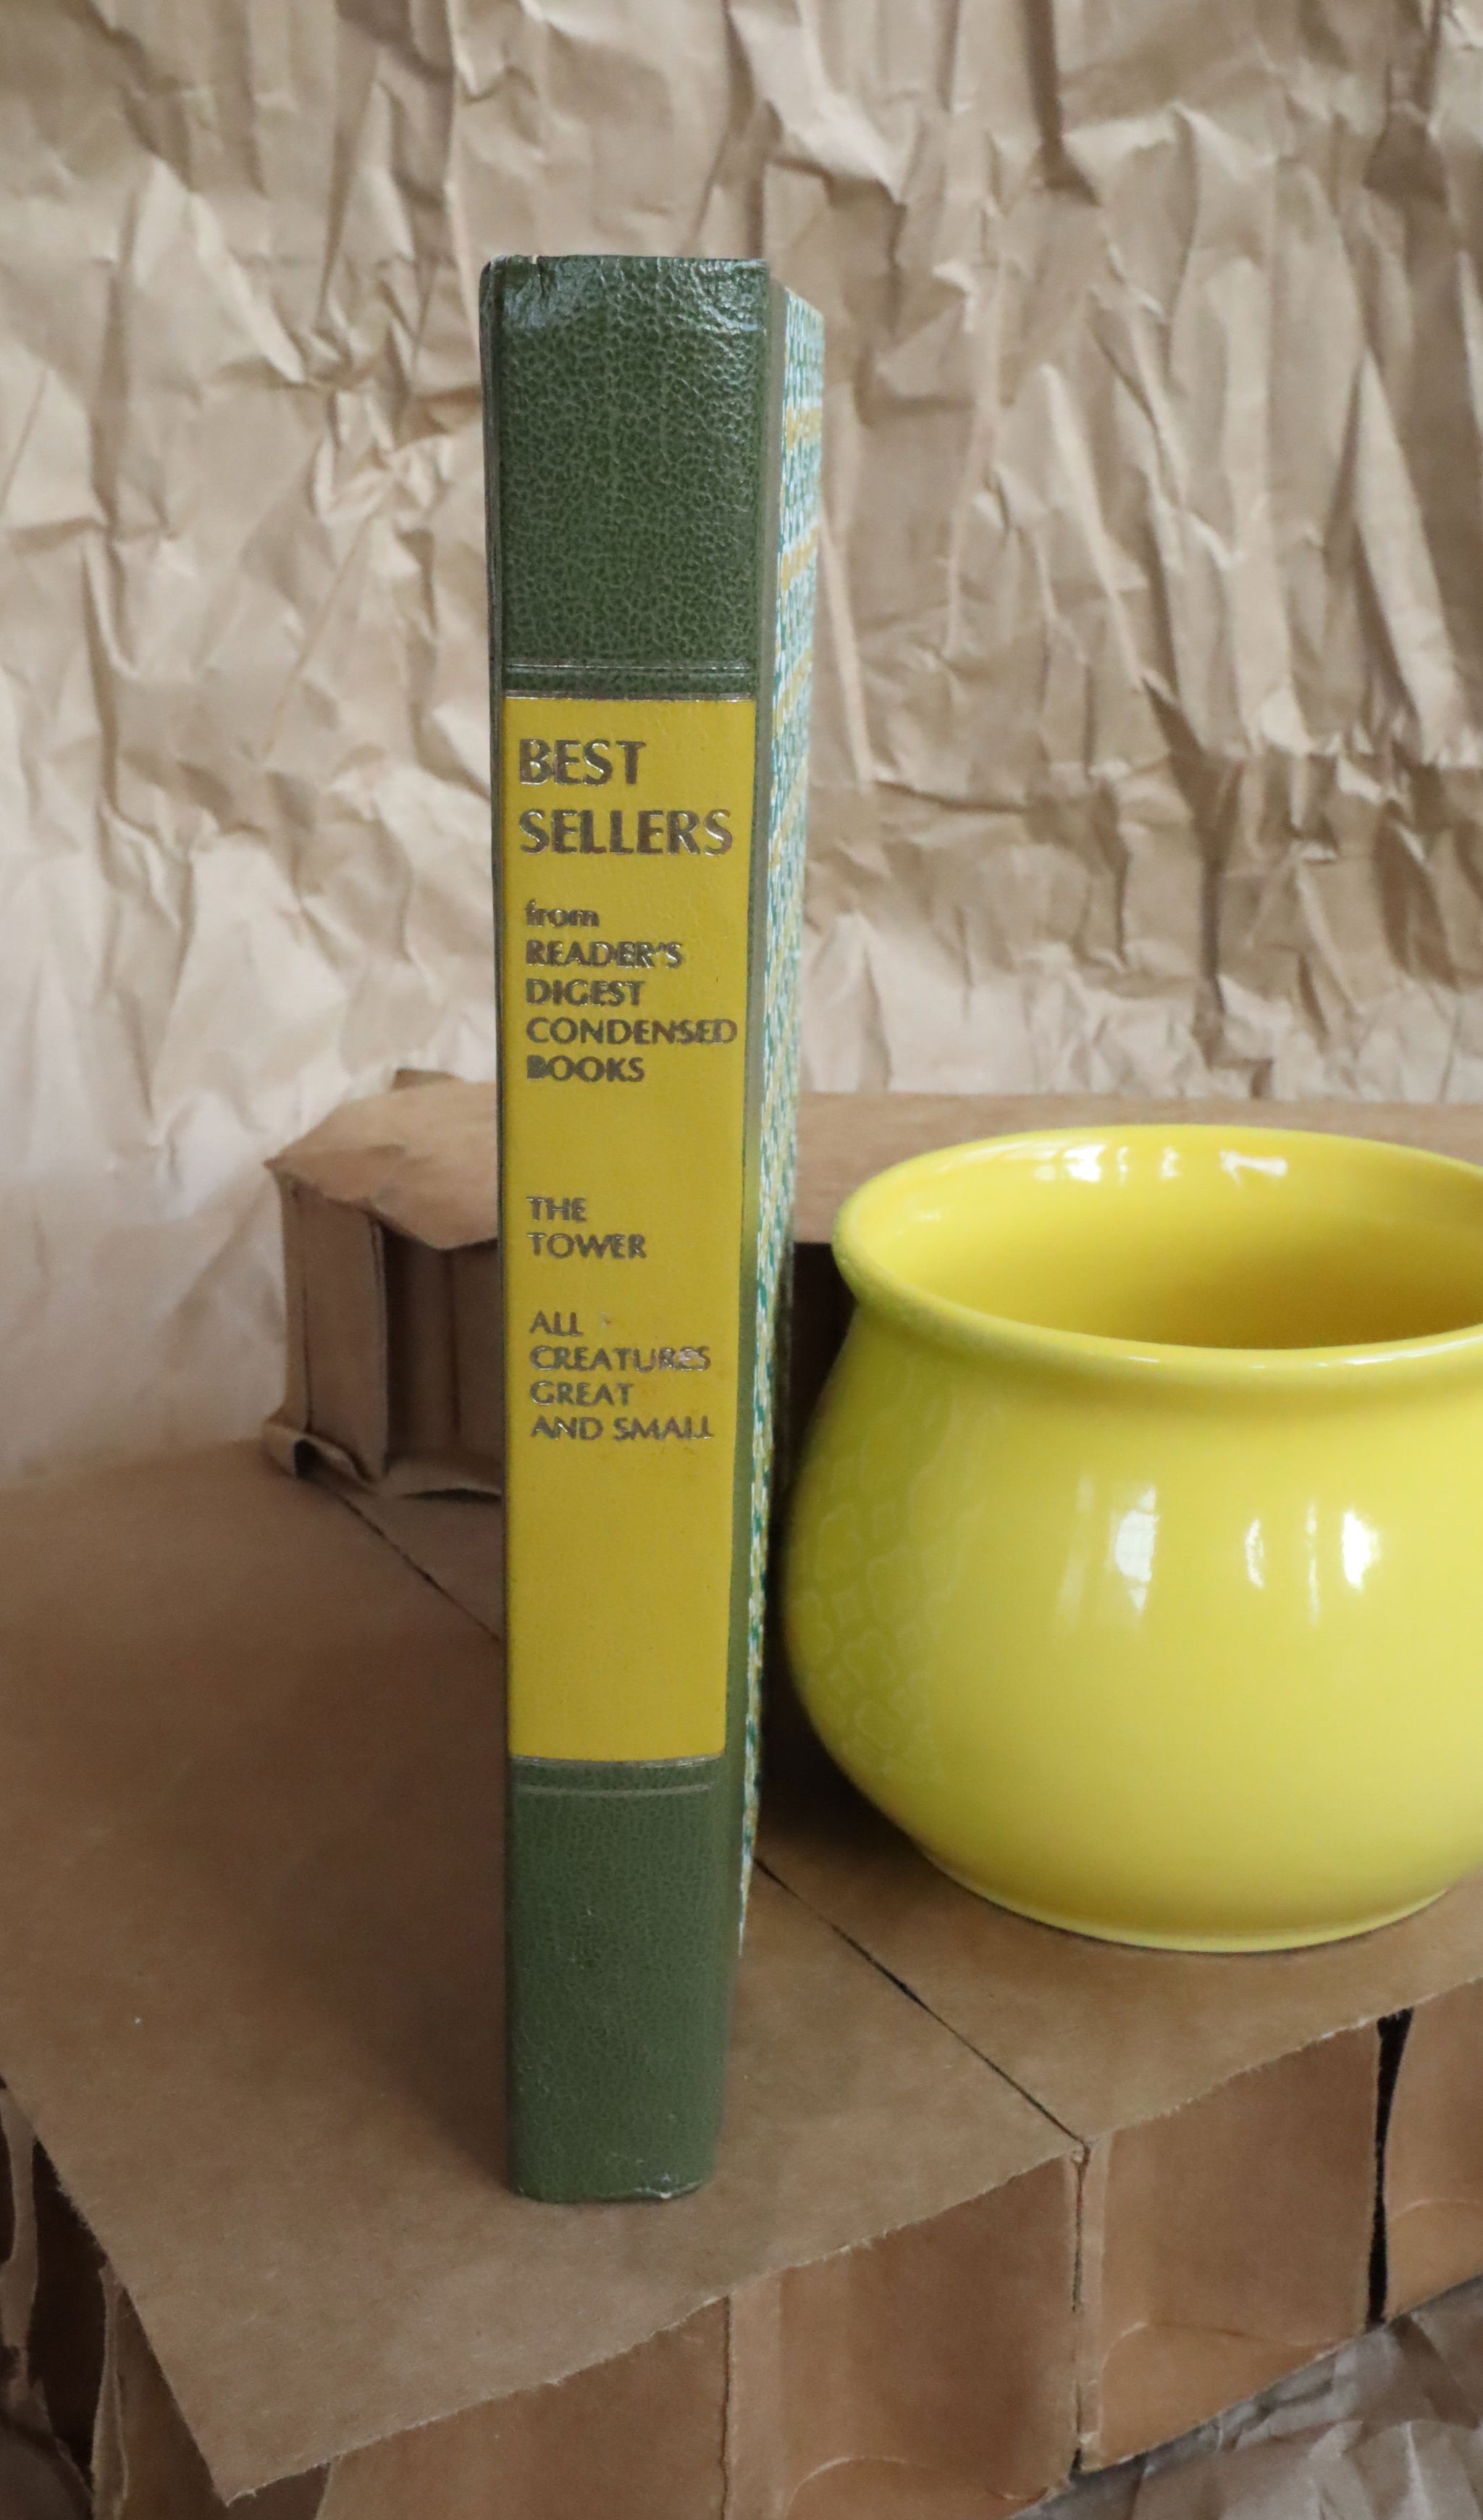 Vintage H.C. Book - Readers DIgest Condensed Books (The Tower & All Creatures Great & Small)